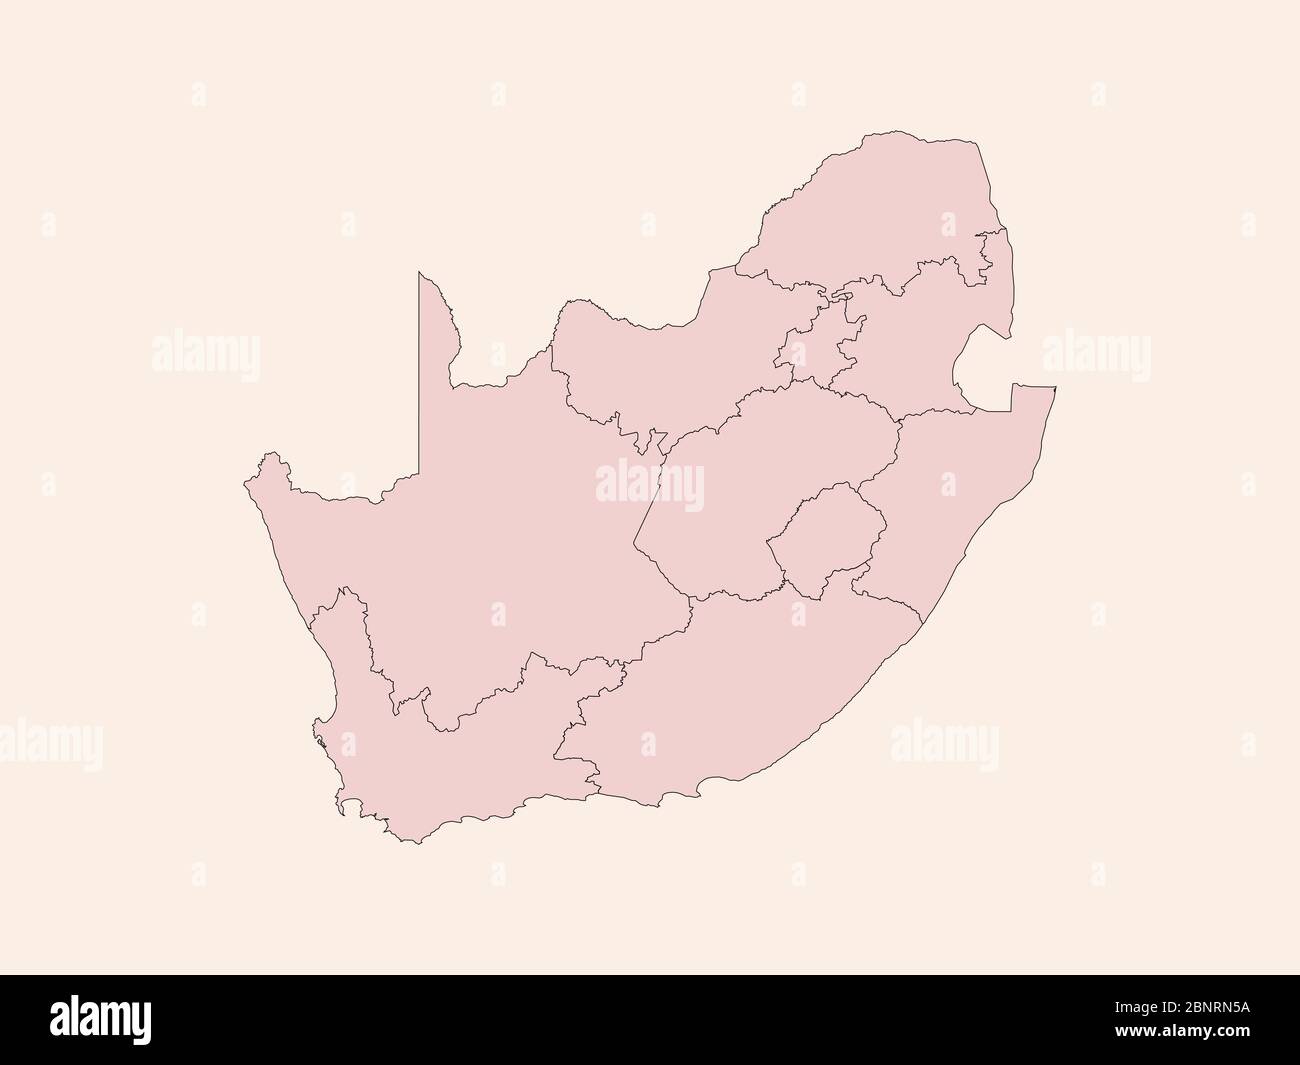 South africa map with provinces graphics design. Vintage pink shade background vector. Perfect for business concepts, backgrounds, backdrop, banner, p Stock Vector